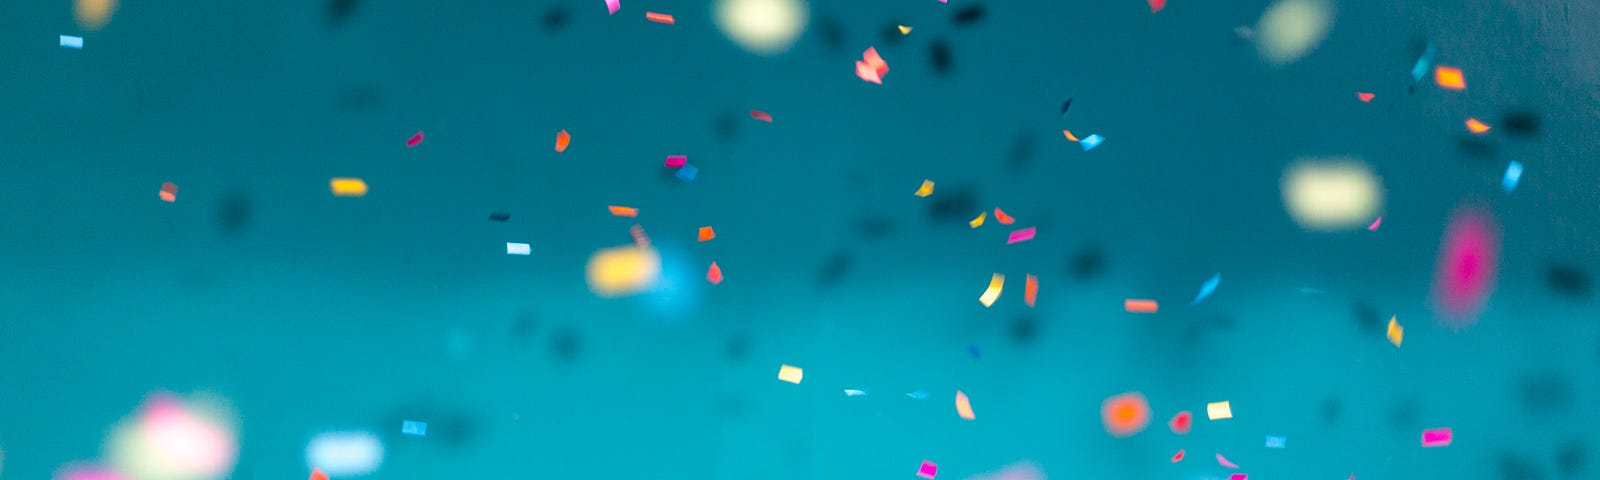 Colorful confetti falling on a blue background, with some pieces in focus and others blurred